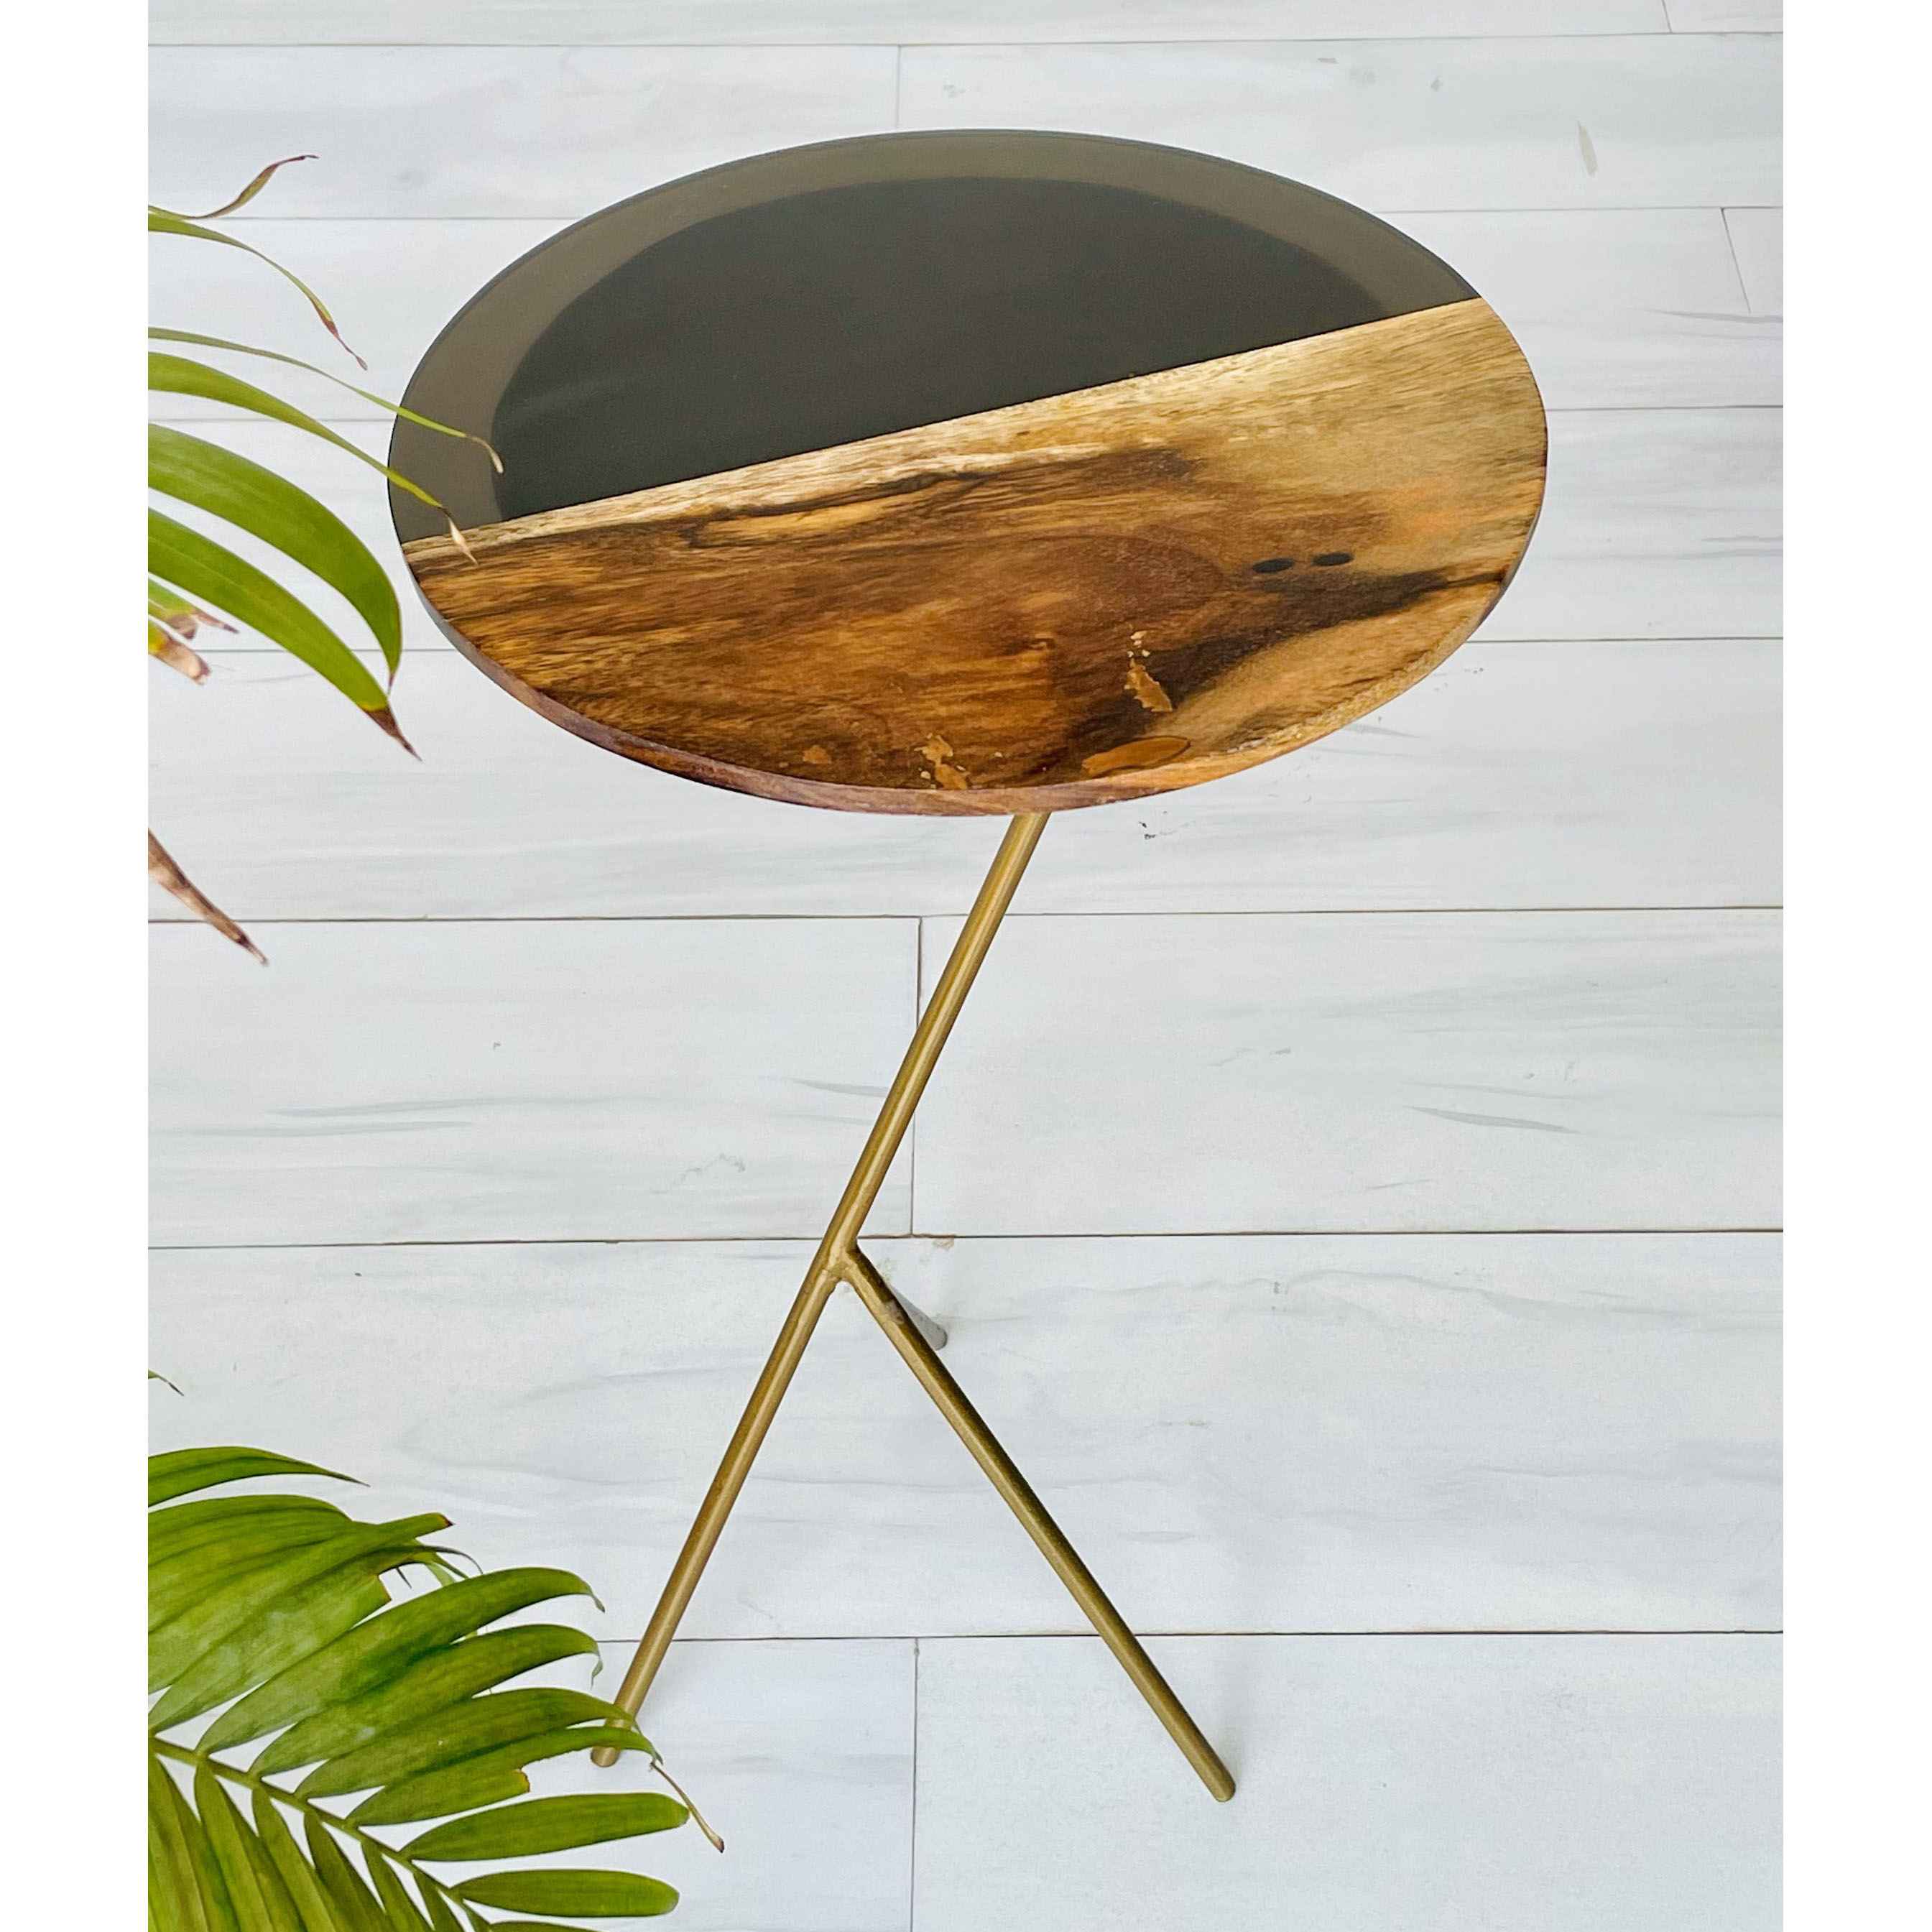 Modern Square Accent Tables